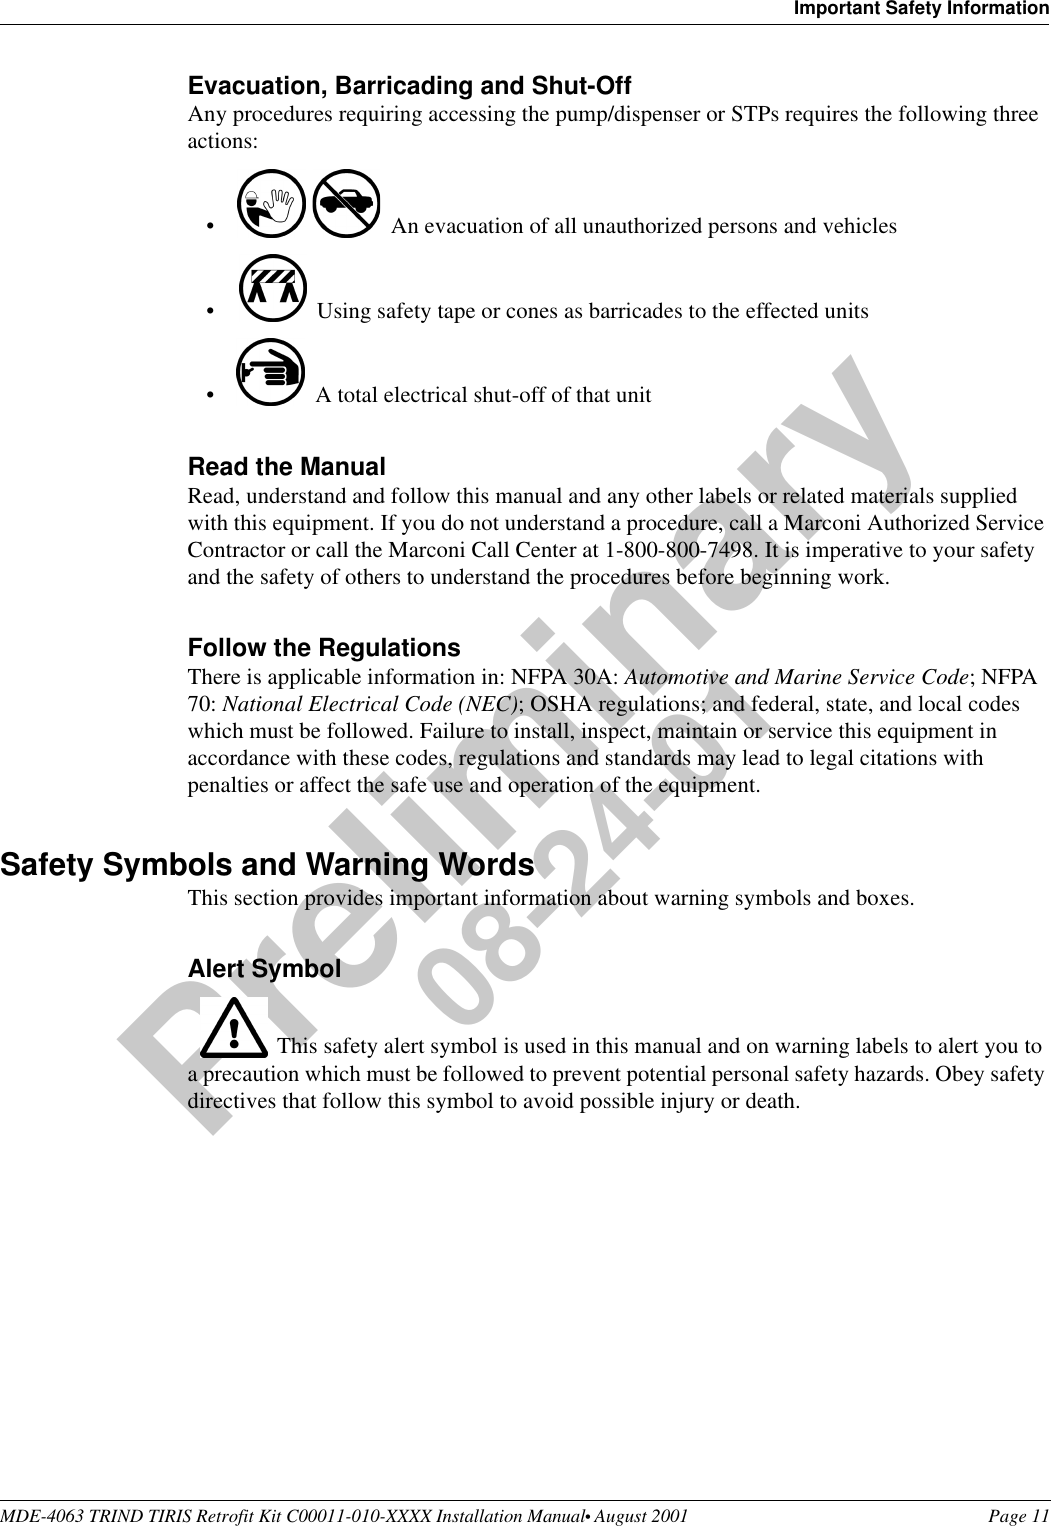 MDE-4063 TRIND TIRIS Retrofit Kit C00011-010-XXXX Installation Manual• August 2001 Page 11Important Safety InformationPreliminary08-24-01Evacuation, Barricading and Shut-OffAny procedures requiring accessing the pump/dispenser or STPs requires the following three actions:•An evacuation of all unauthorized persons and vehicles •Using safety tape or cones as barricades to the effected units•A total electrical shut-off of that unitRead the ManualRead, understand and follow this manual and any other labels or related materials supplied with this equipment. If you do not understand a procedure, call a Marconi Authorized Service Contractor or call the Marconi Call Center at 1-800-800-7498. It is imperative to your safety and the safety of others to understand the procedures before beginning work.Follow the RegulationsThere is applicable information in: NFPA 30A: Automotive and Marine Service Code; NFPA 70: National Electrical Code (NEC); OSHA regulations; and federal, state, and local codes which must be followed. Failure to install, inspect, maintain or service this equipment in accordance with these codes, regulations and standards may lead to legal citations with penalties or affect the safe use and operation of the equipment.Safety Symbols and Warning WordsThis section provides important information about warning symbols and boxes.Alert Symbol This safety alert symbol is used in this manual and on warning labels to alert you to a precaution which must be followed to prevent potential personal safety hazards. Obey safety directives that follow this symbol to avoid possible injury or death.